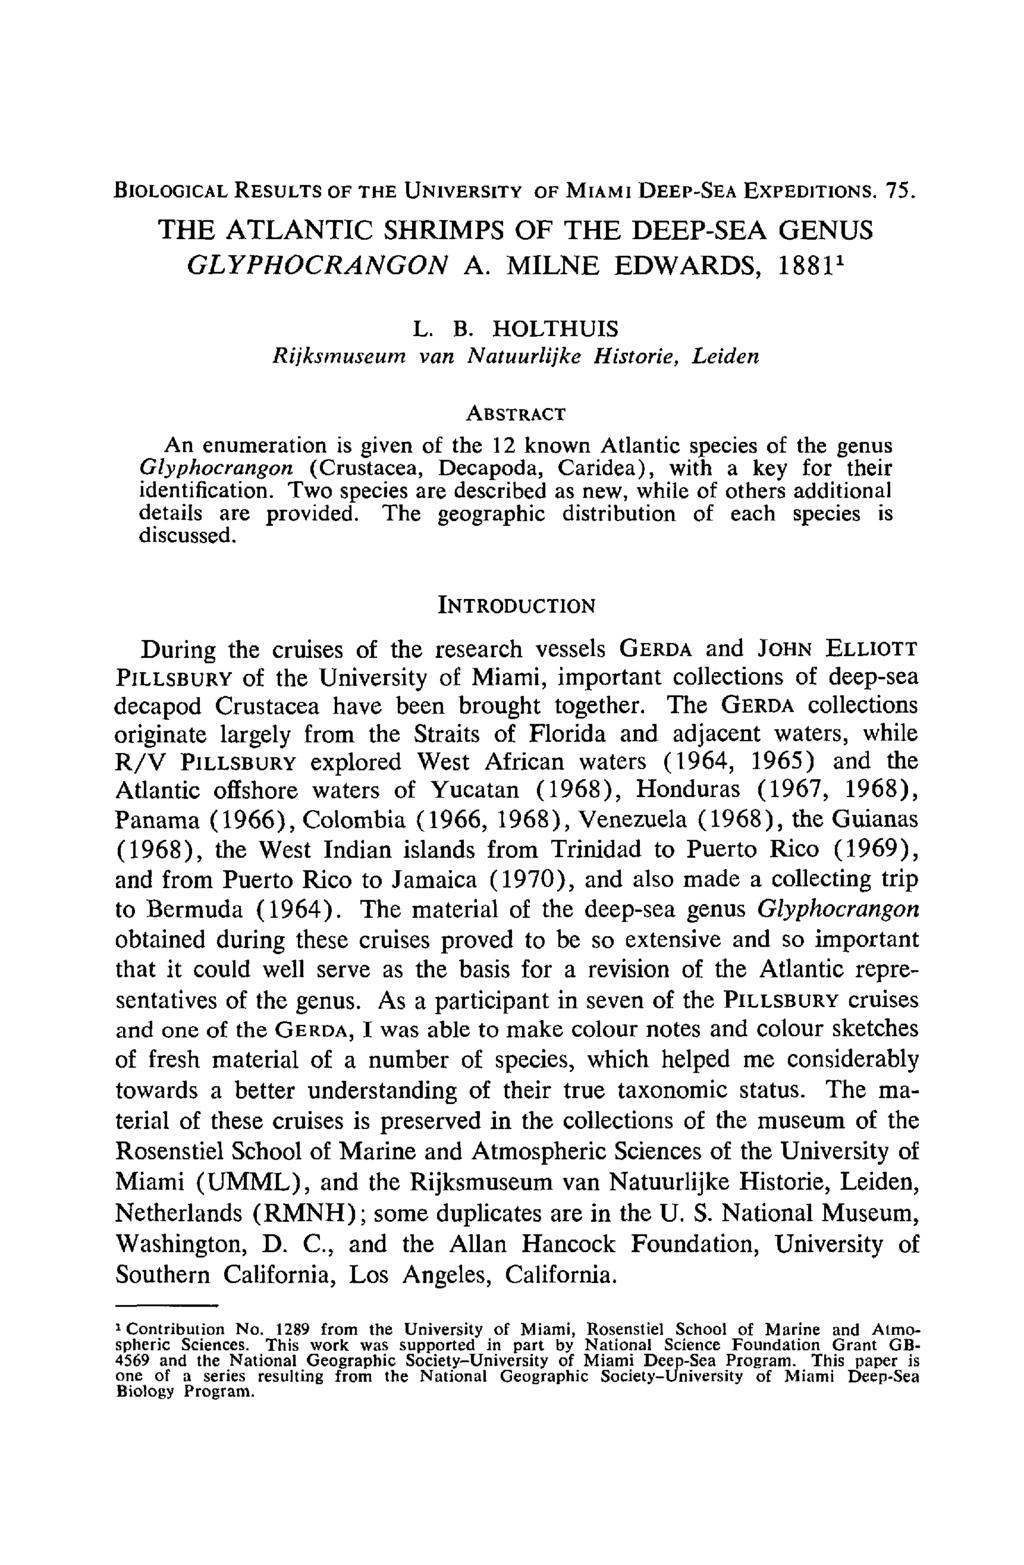 BIOLOGICAL RESULTS OF THE UNIVERSITY OF MIAMI DEEP-SEA EXPEDITIONS. 75. THE ATLANTIC SHRIMPS OF THE DEEP-SEA GENUS GLYPHOCRANGON A. MILNE EDWARDS, 188P L. B.